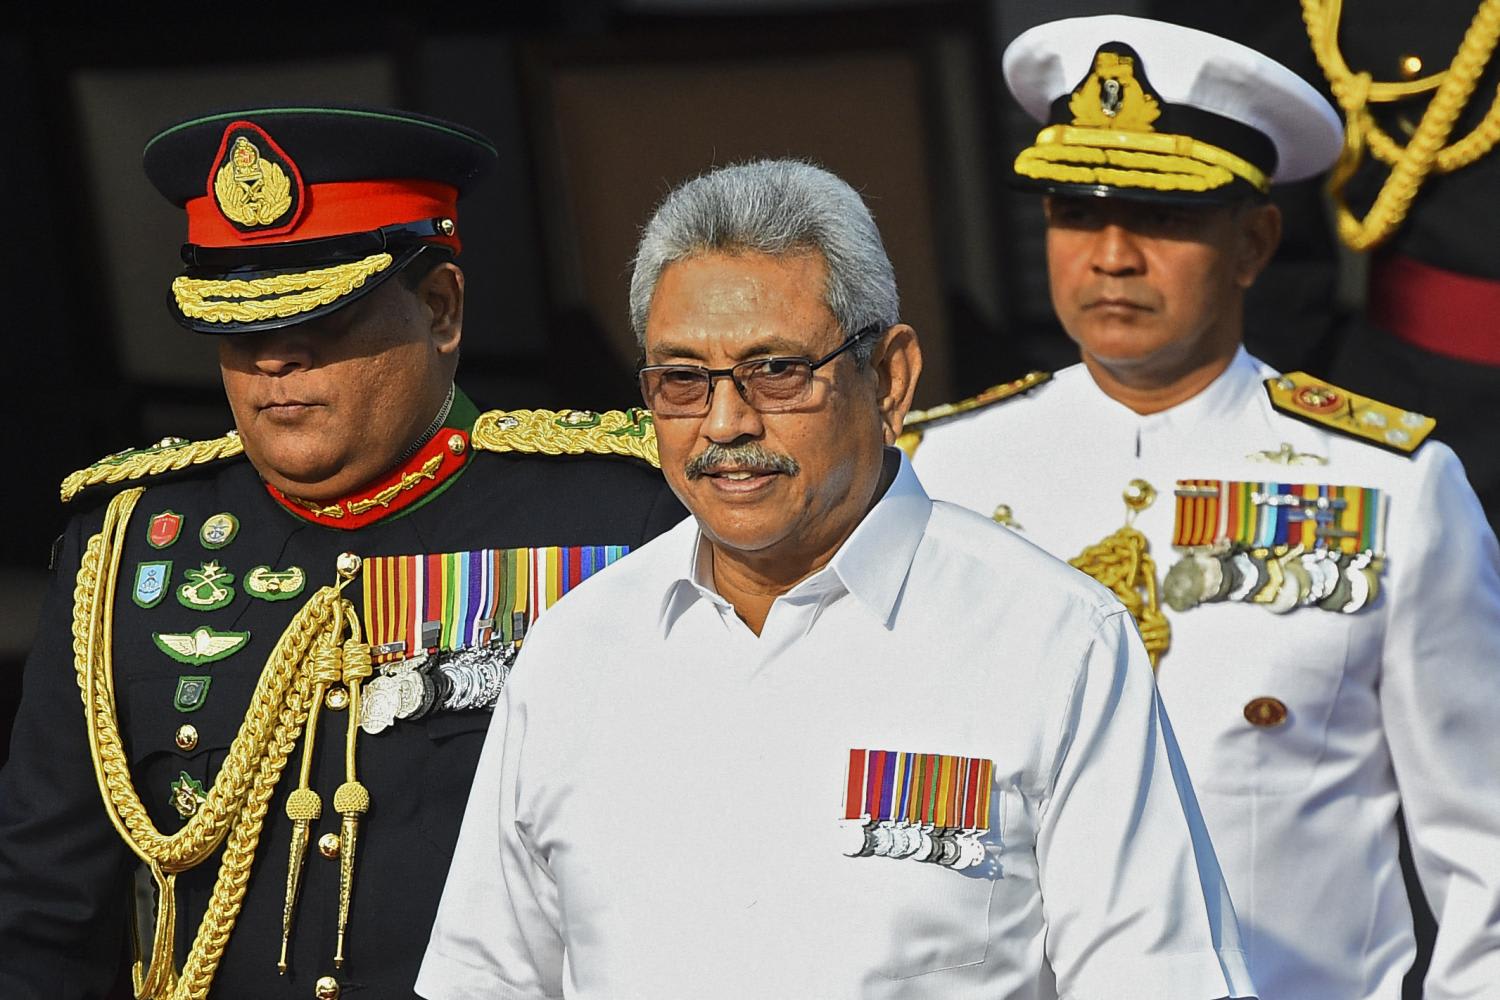 Sri Lanka's President Gotabaya Rajapaksa (centre) at the country's 72nd Independence Day celebrations in Colombo on Feb 4, 2020.